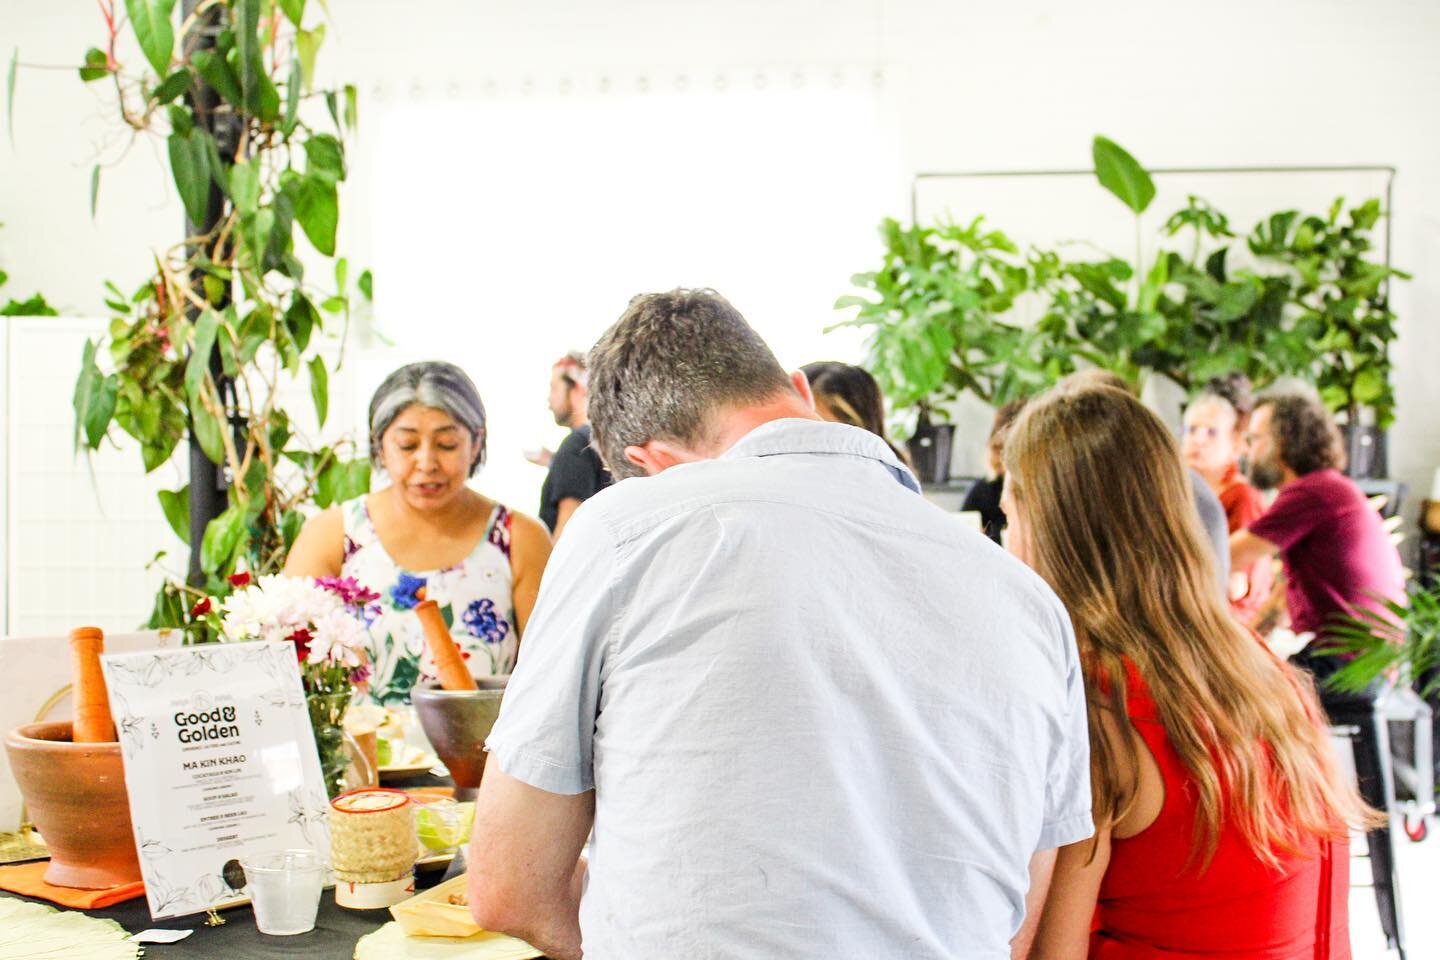 @trueleafstudio is truly a versatile, gorgeous plant shop and studio space that you can transform for the perfect experience for your guests 💛 the lighting was incredible during the golden hour at this dinner party ✨#goodandgolden #laofood #laocuisi